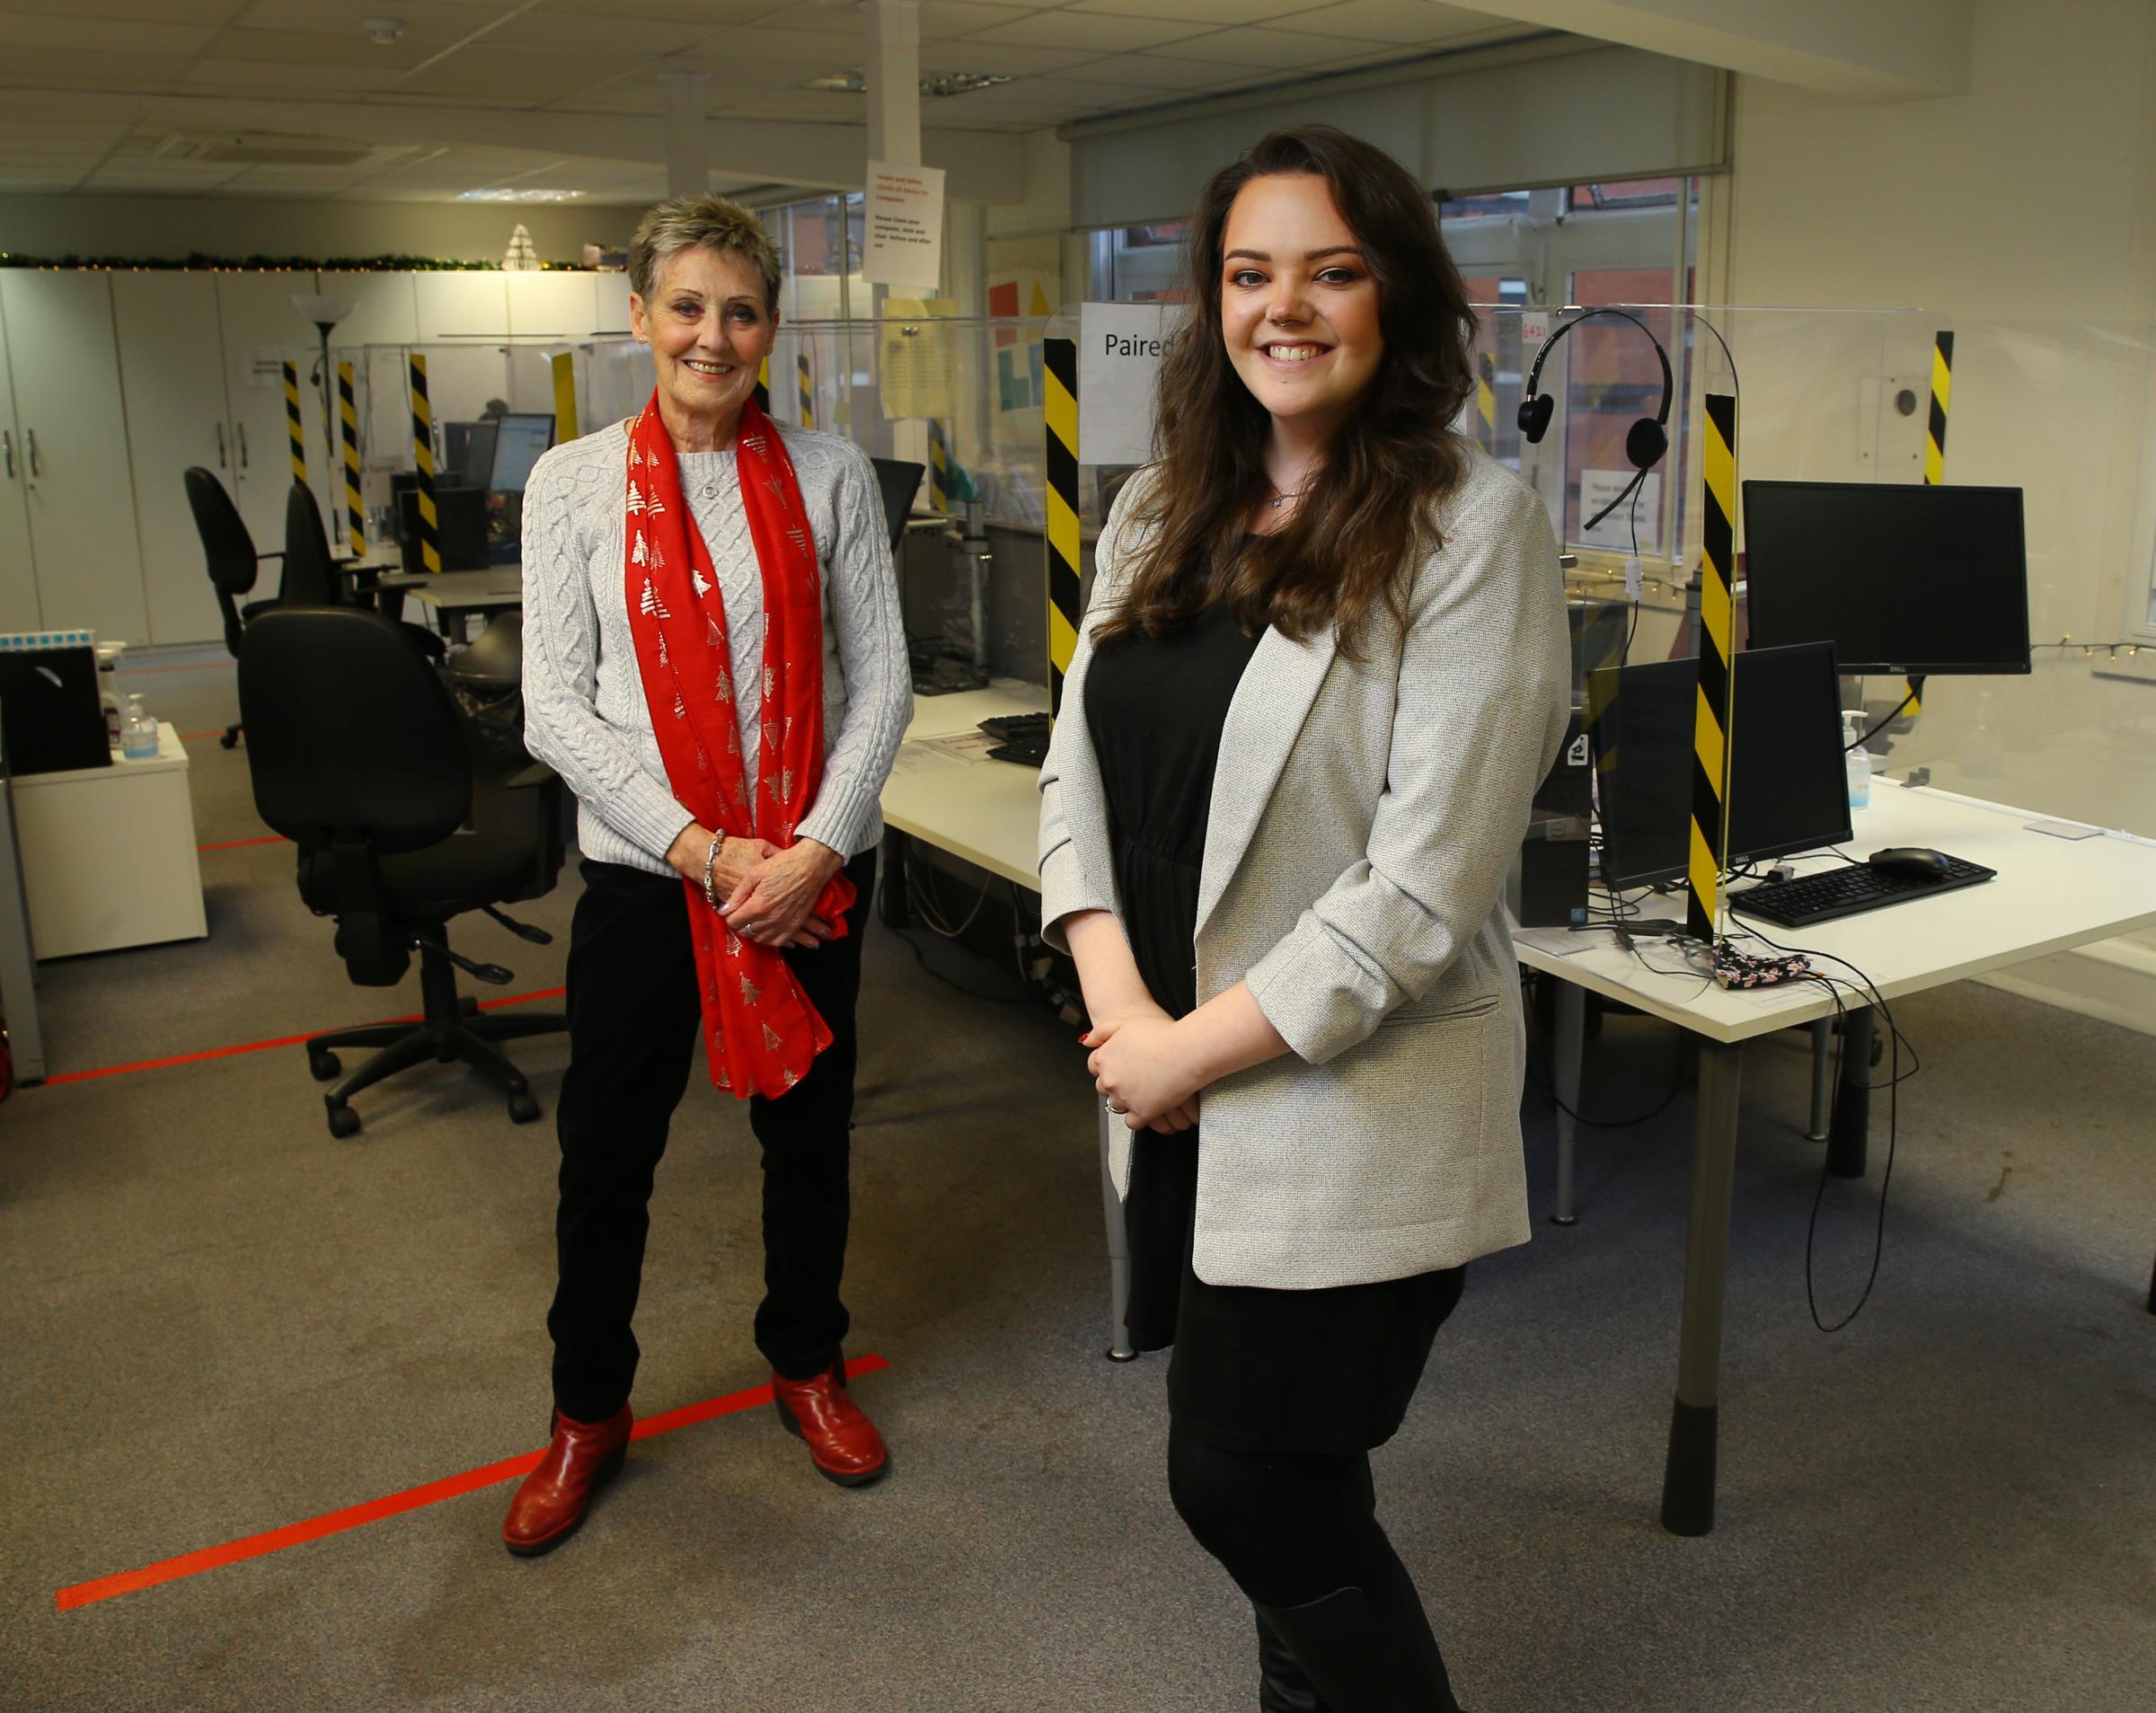 Meg Robertson, left, Childline volunteer pictured with Lauren Burke at right, Childline team manager. They are pictured at the Childline Glasgow base. Photograph by Colin Mearns 16 December 2021 For Glasgow Times, see story by Ruth Suter